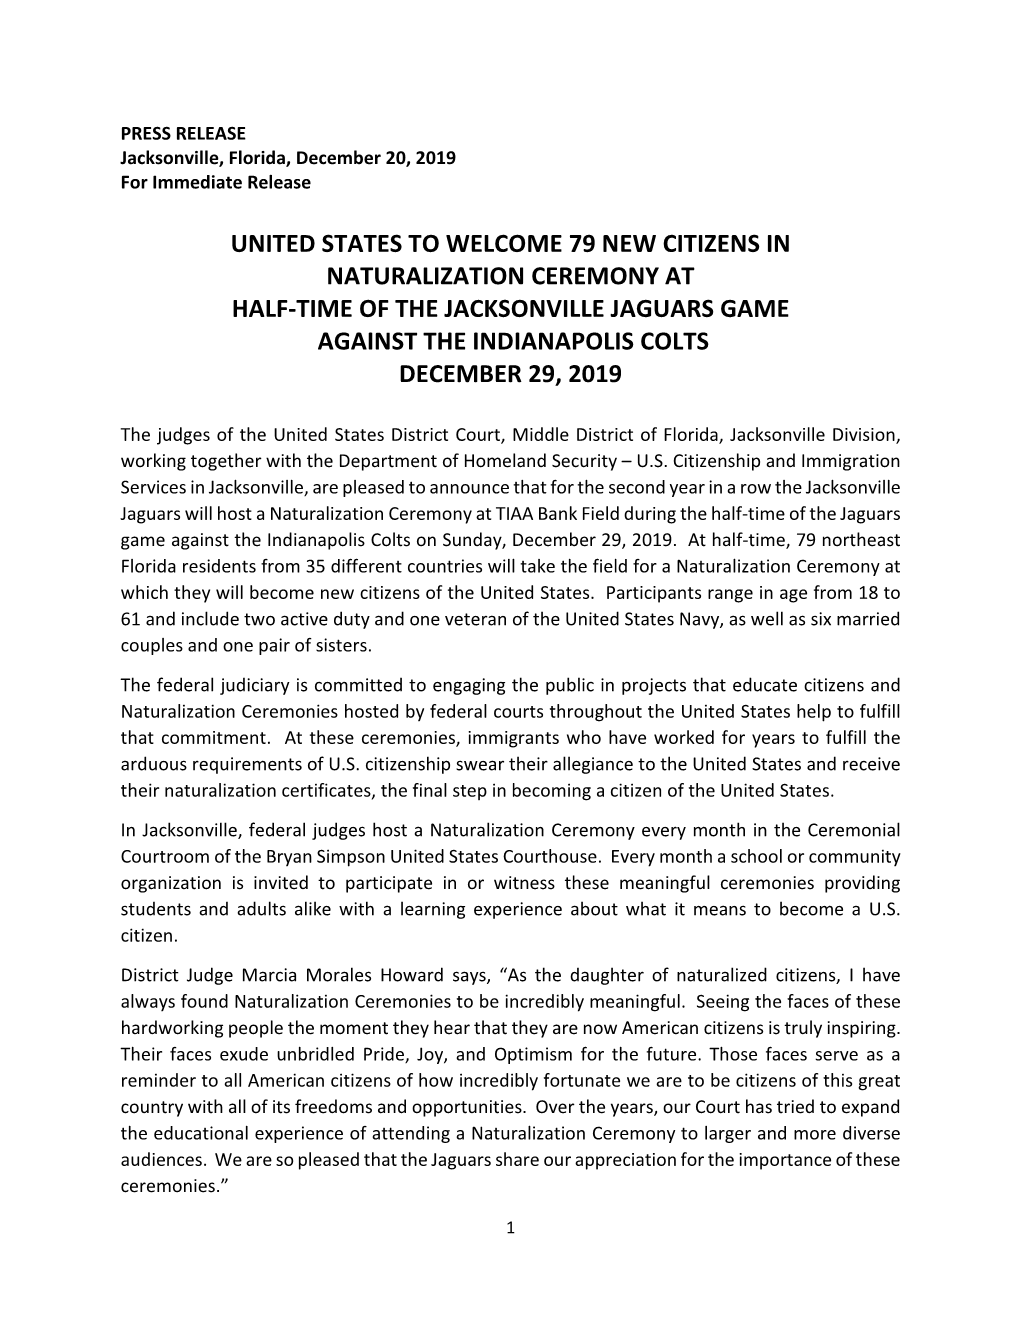 United States to Welcome 79 New Citizens in Naturalization Ceremony at Half-Time of the Jacksonville Jaguars Game Against the Indianapolis Colts December 29, 2019